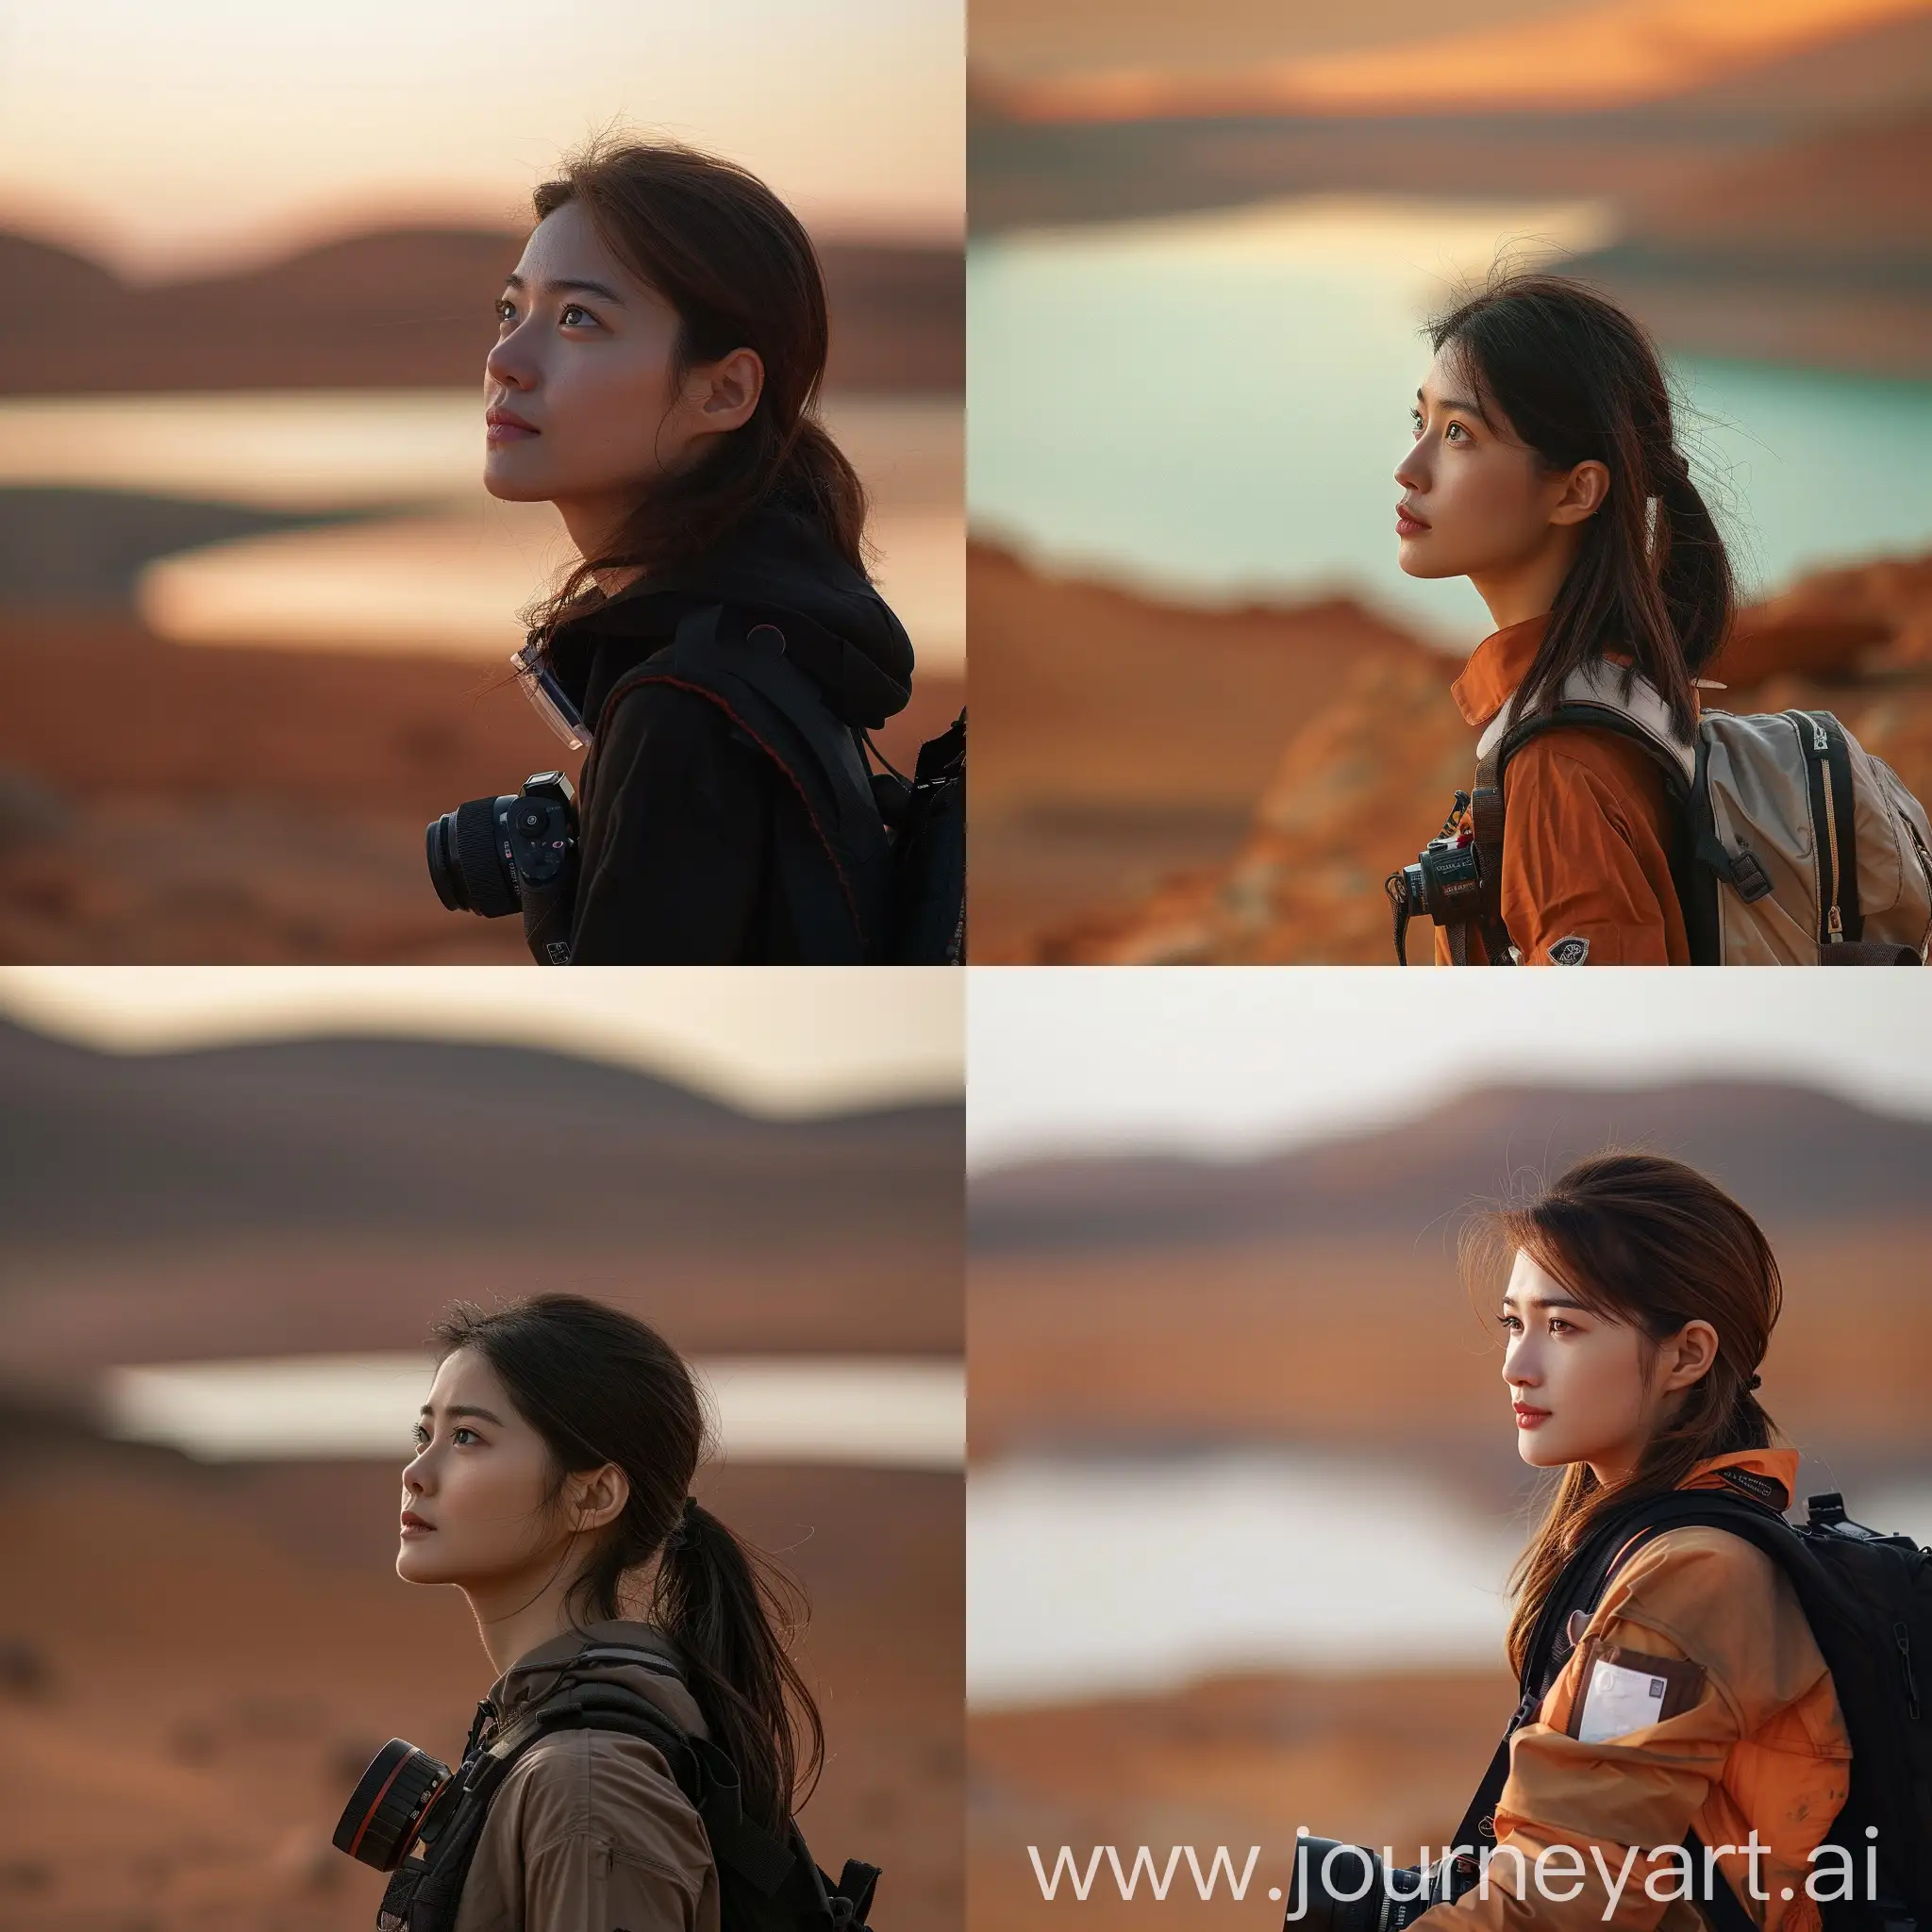 Thai-Woman-Portrait-on-Mars-with-Blurred-Lake-Background